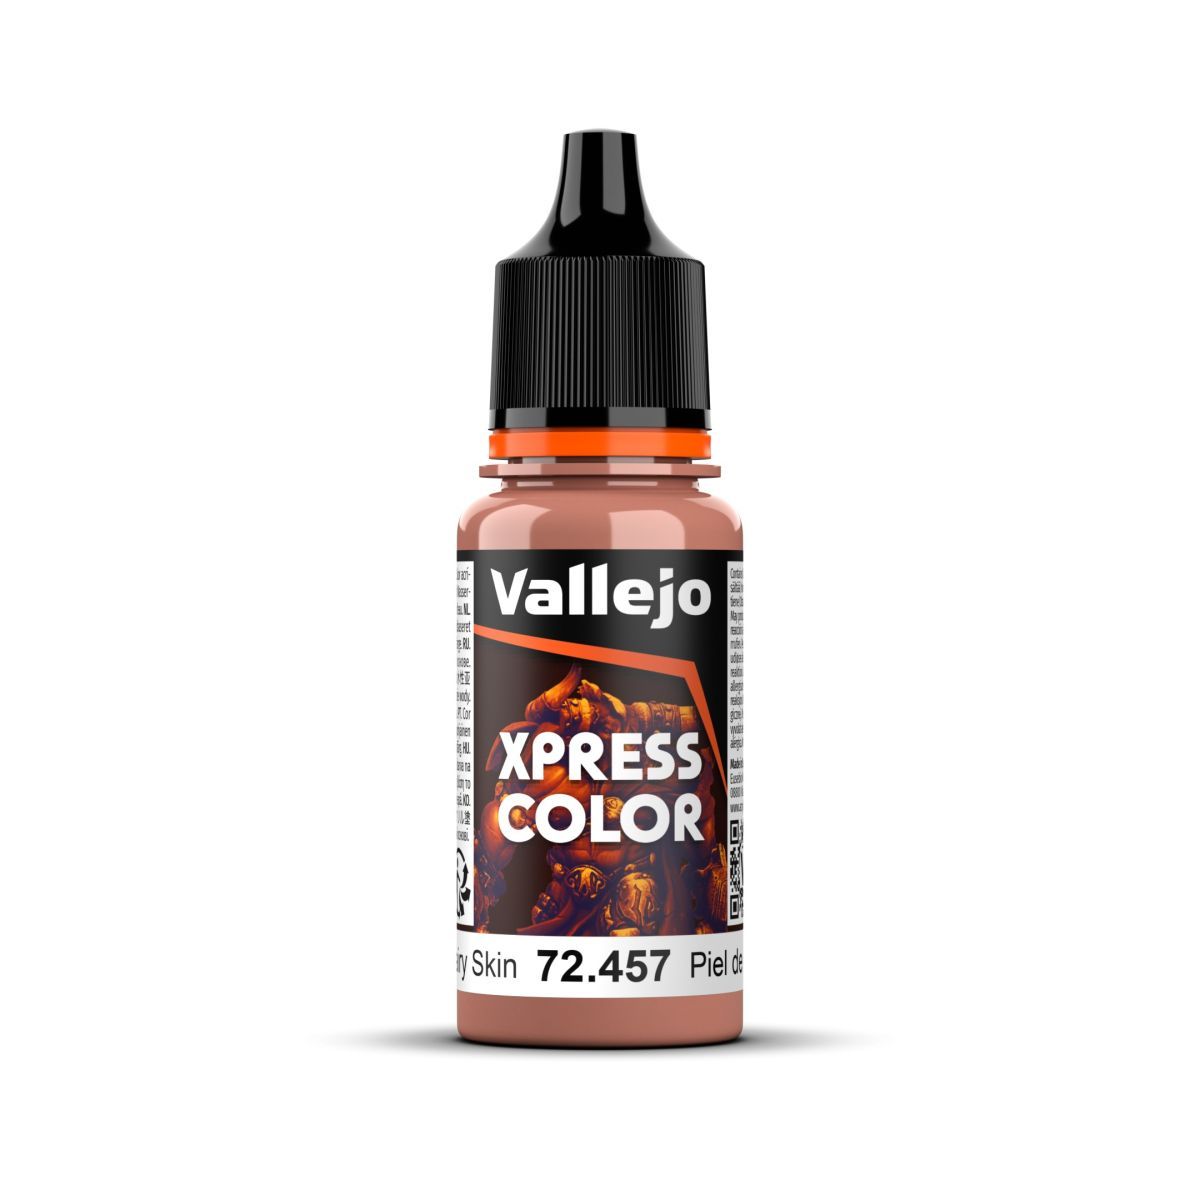 Vallejo Xpress Color Fairy Skin 18 ml Acrylic Paint